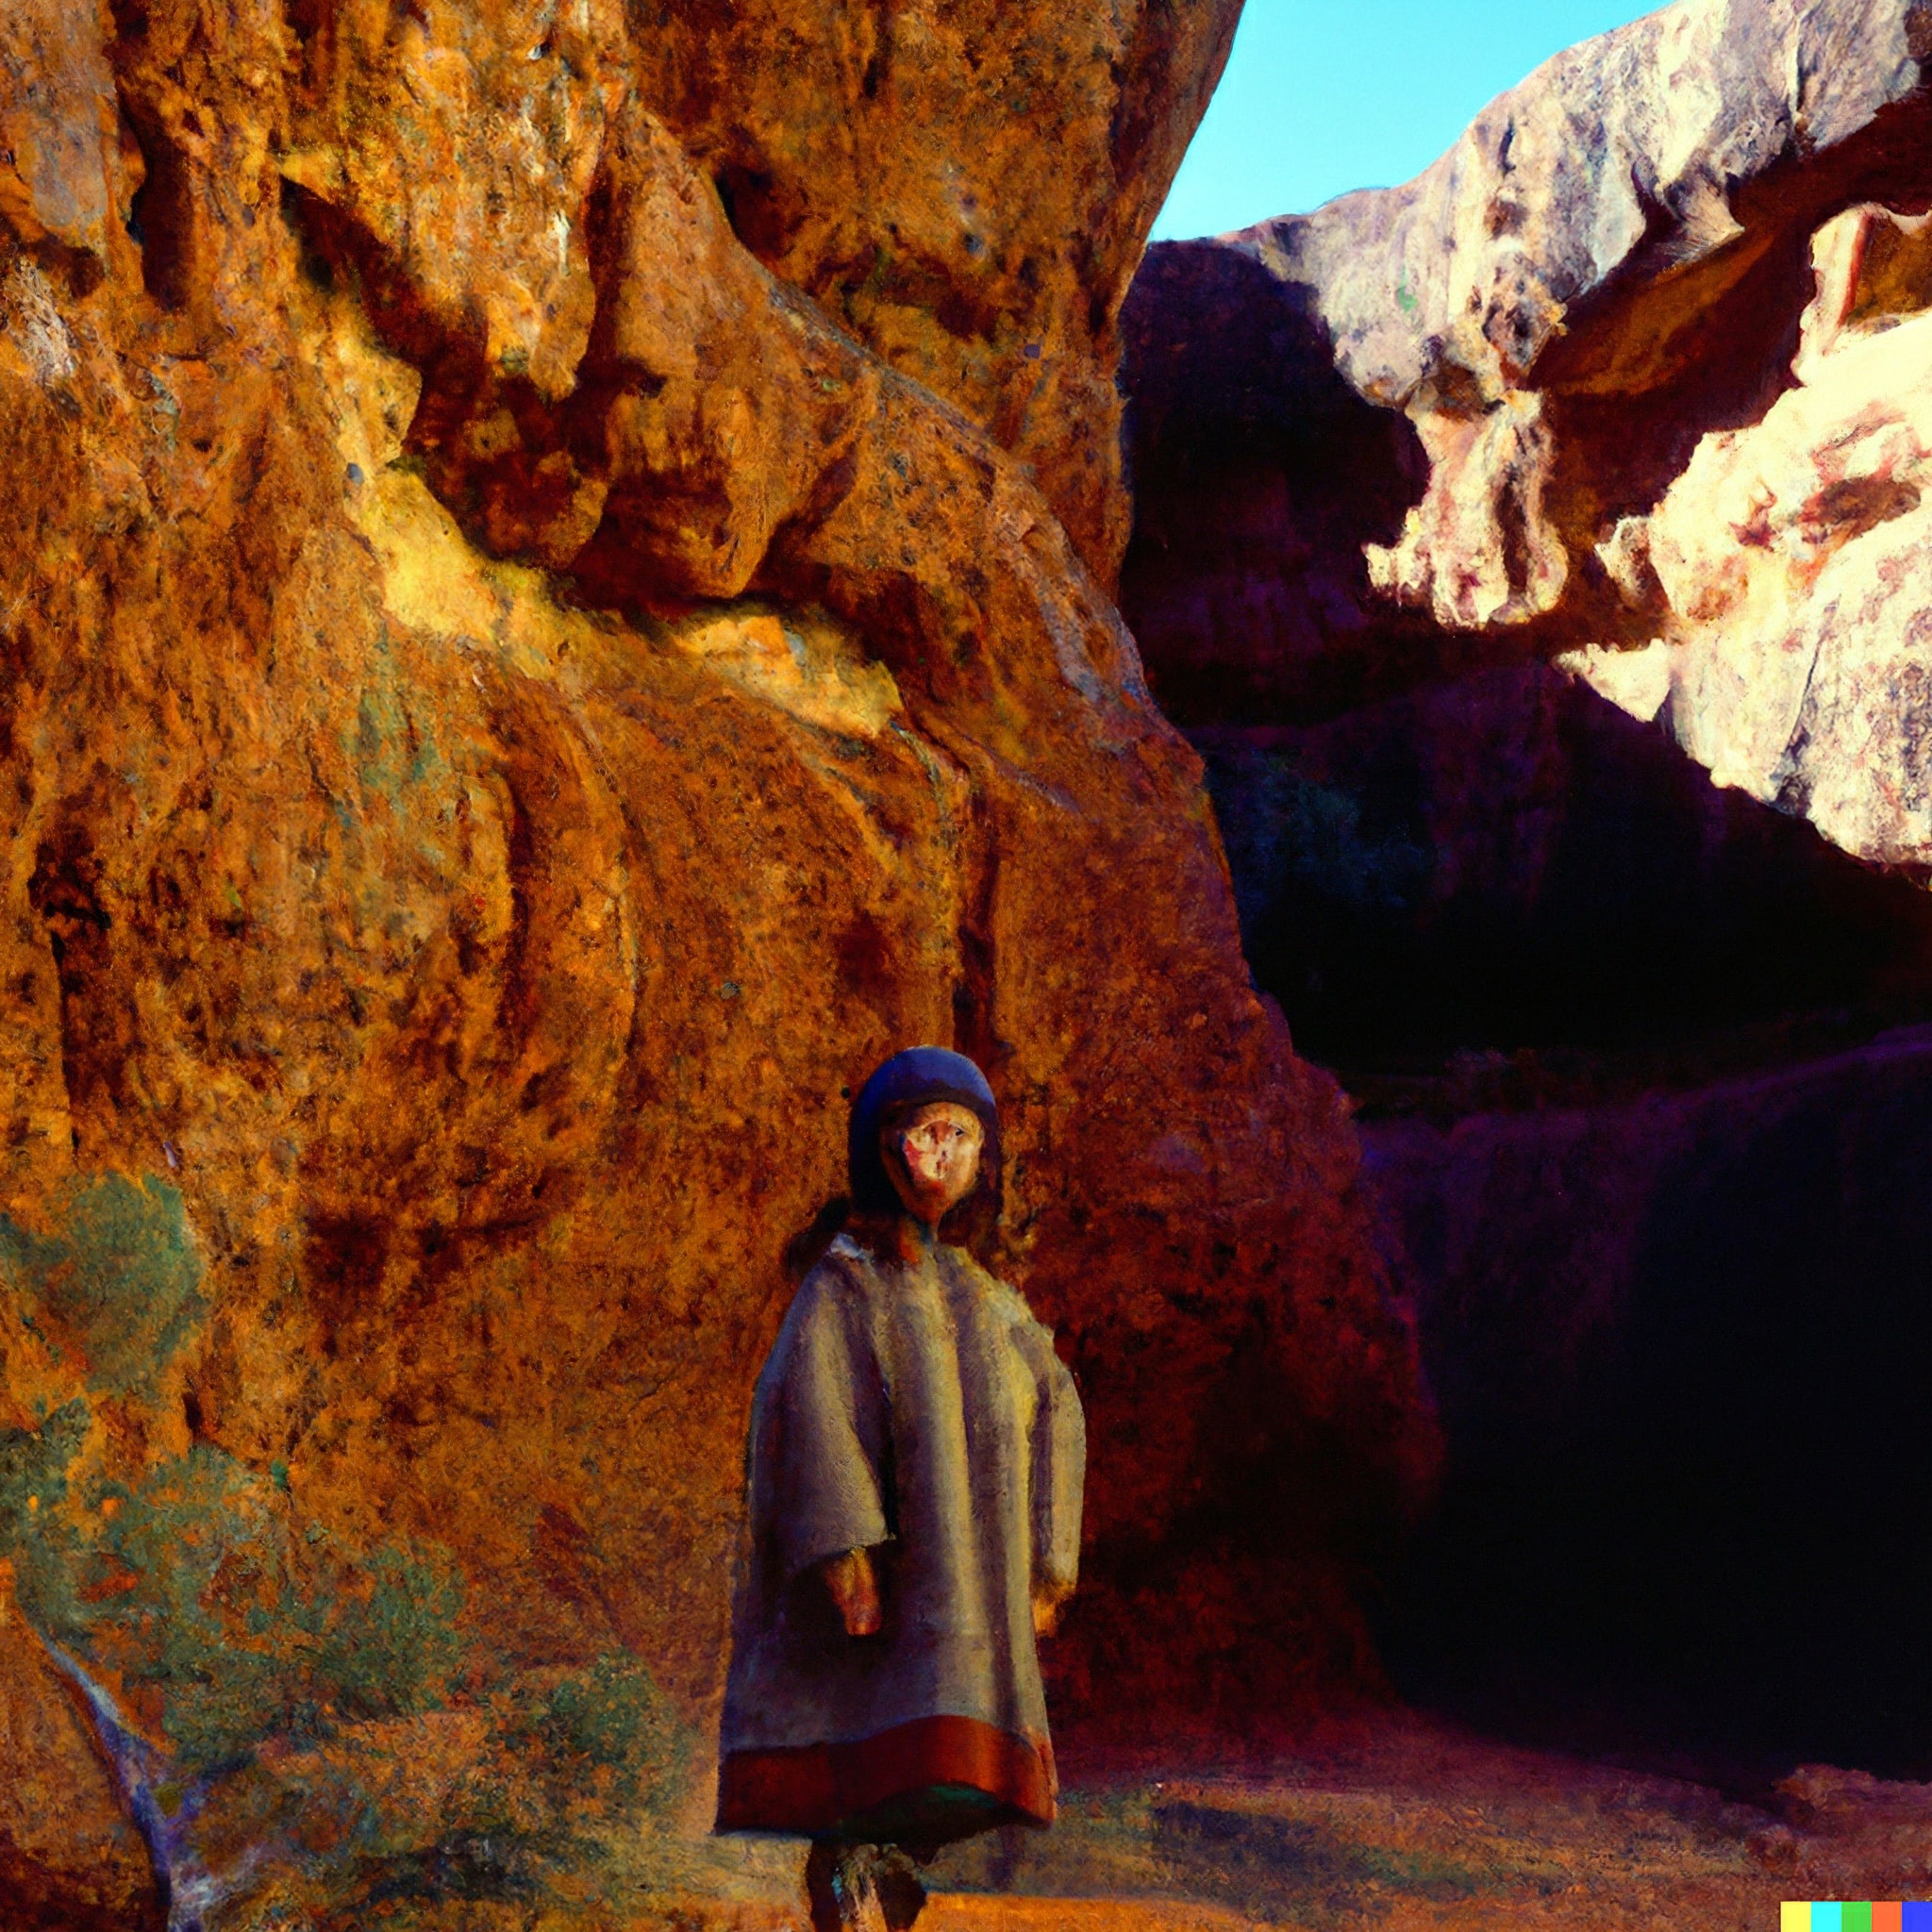 inuit-girl-with-winter-clothes-at-australia-canyon